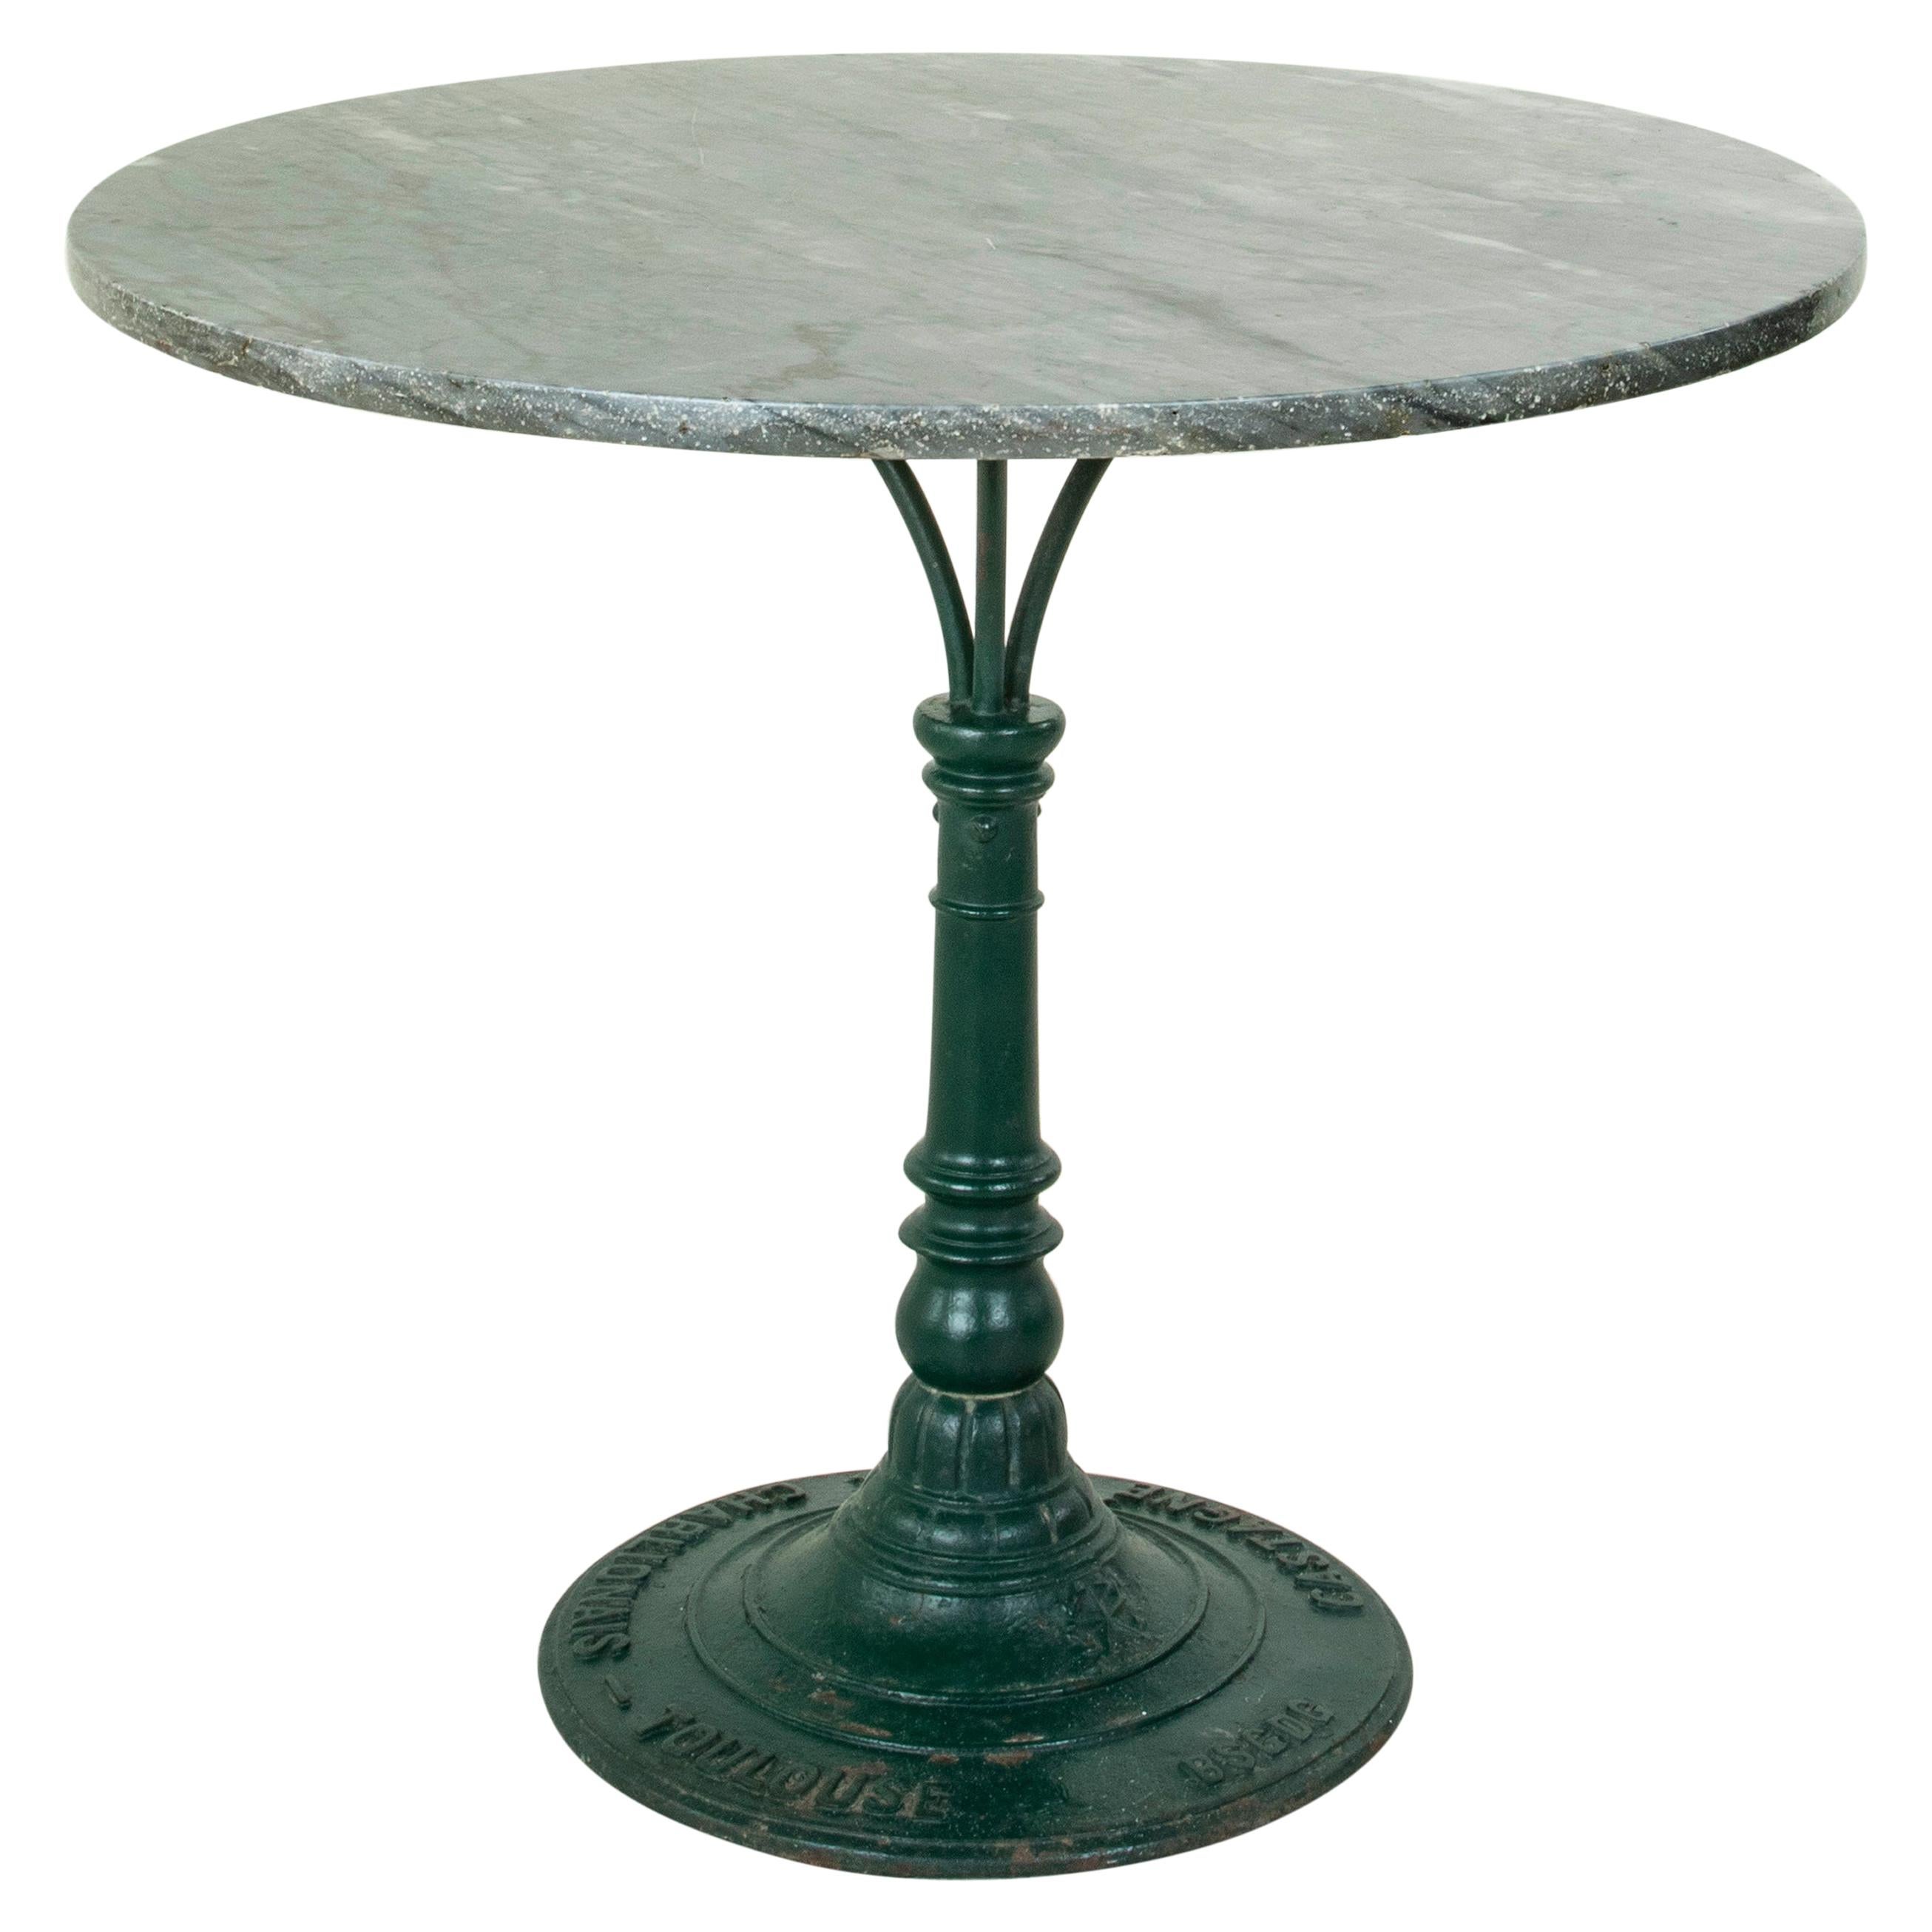 French Cast Iron Pedestal Table with Marble Top, circa 1900